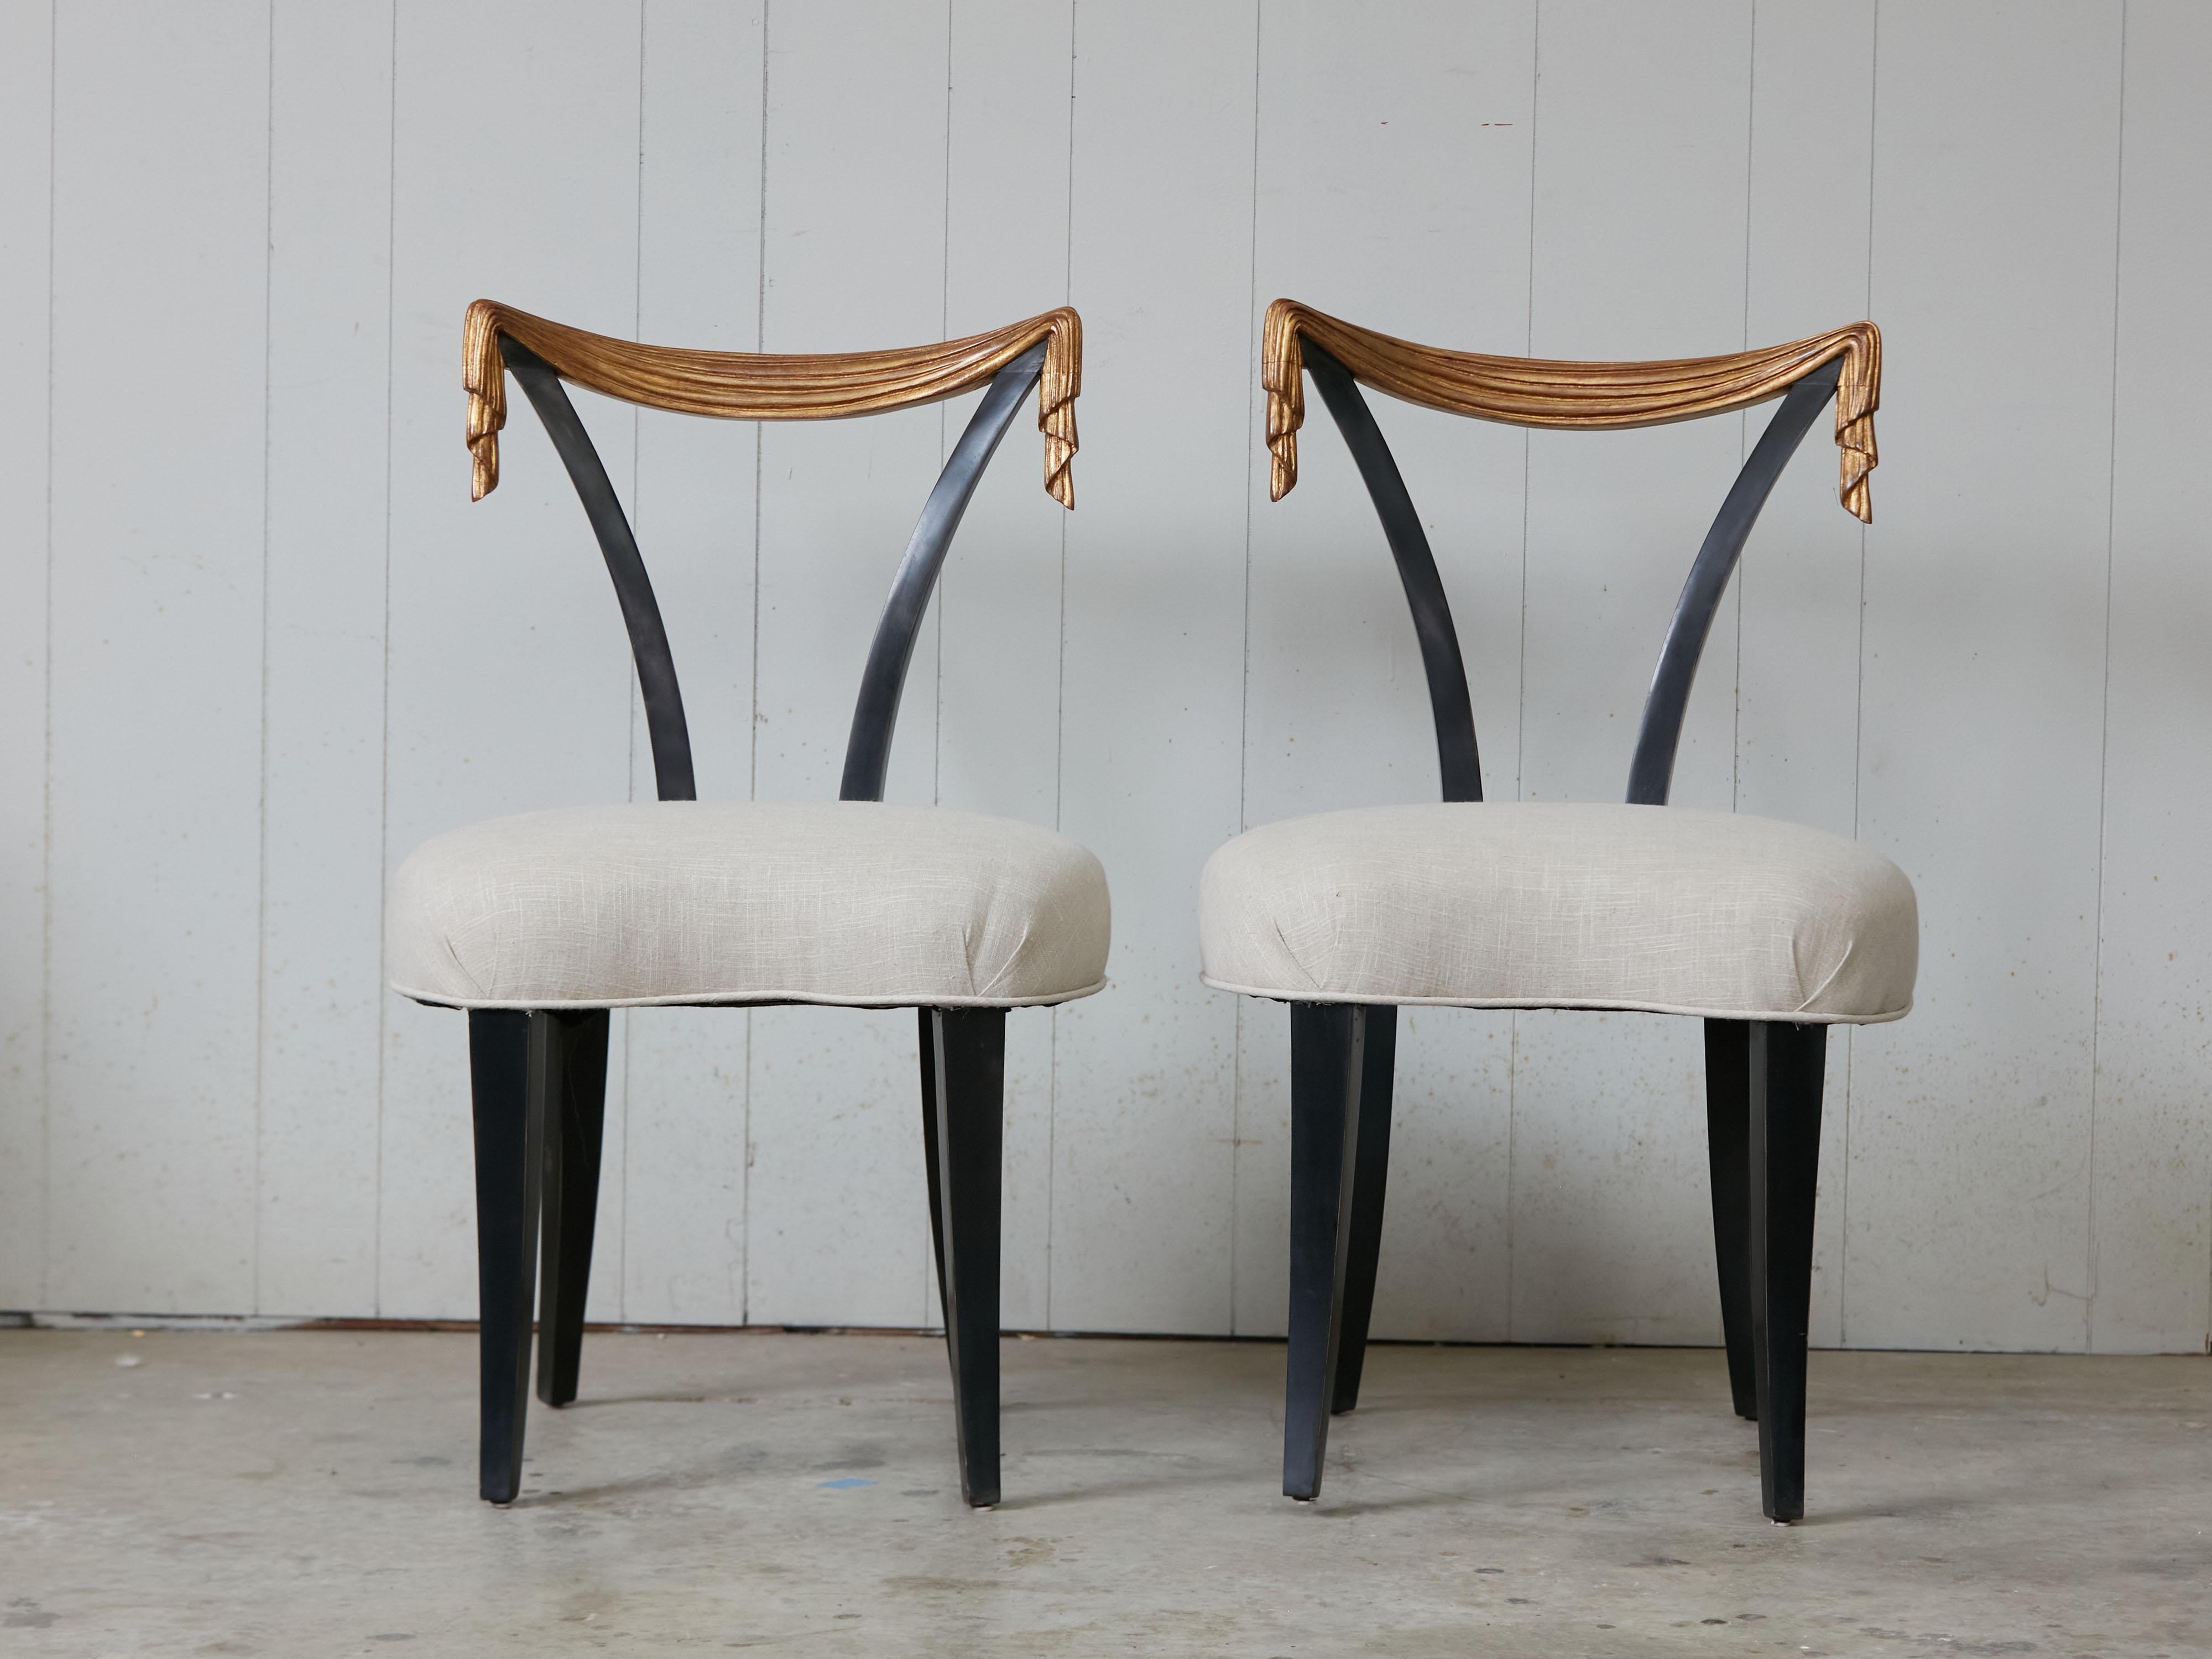 A pair of Dorothy Draper style Hollywood Regency black and gold side chairs from the mid 20th century, with hand-carved gilt draped backs. Charming us with their dramatic presence and contrasting colors, each of this pair of Dorothy Draper style